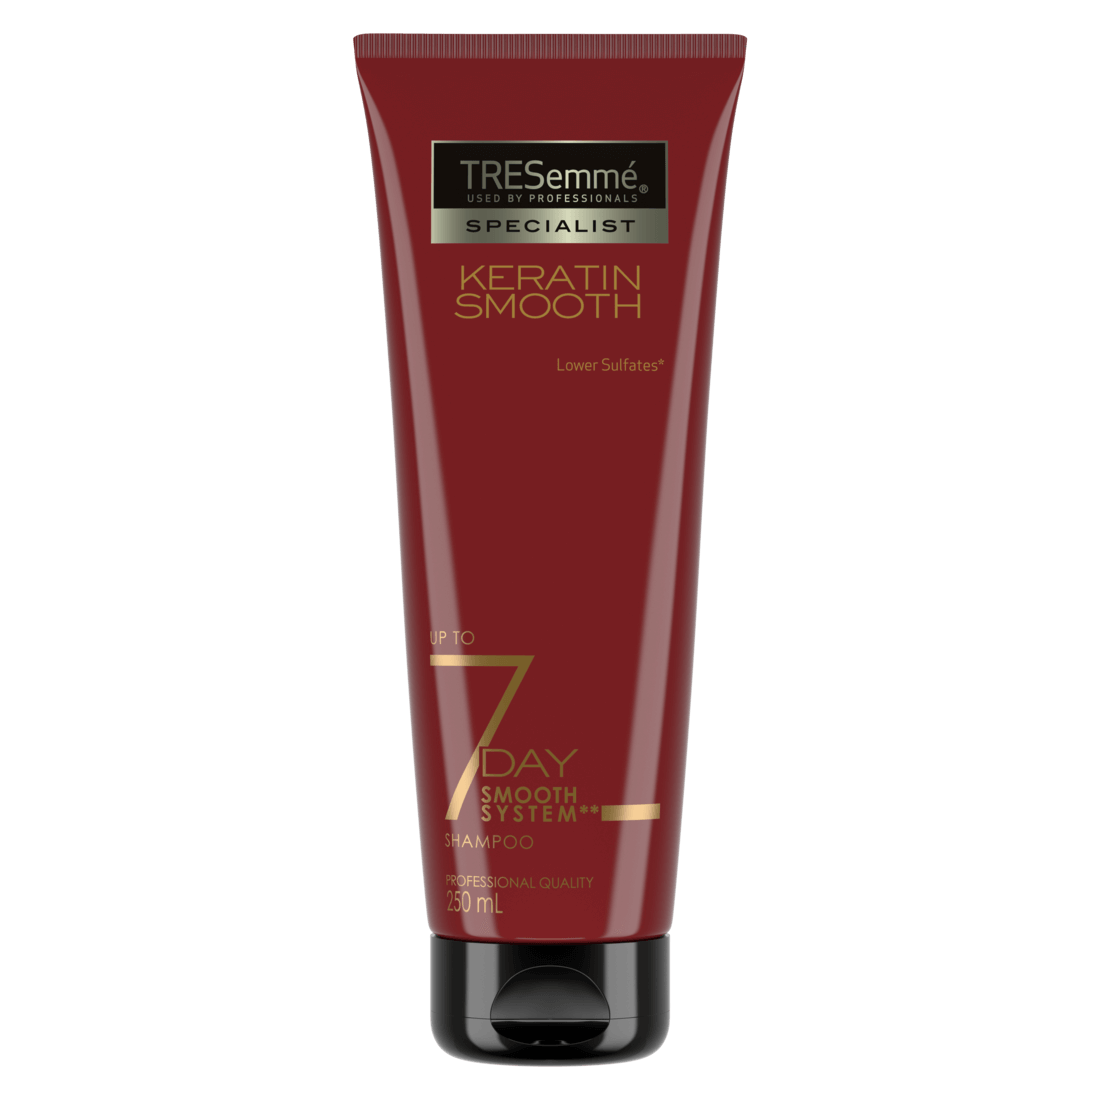 A 250ml bottle of TRESemmé 7 Day Smooth Shampoo front of pack image